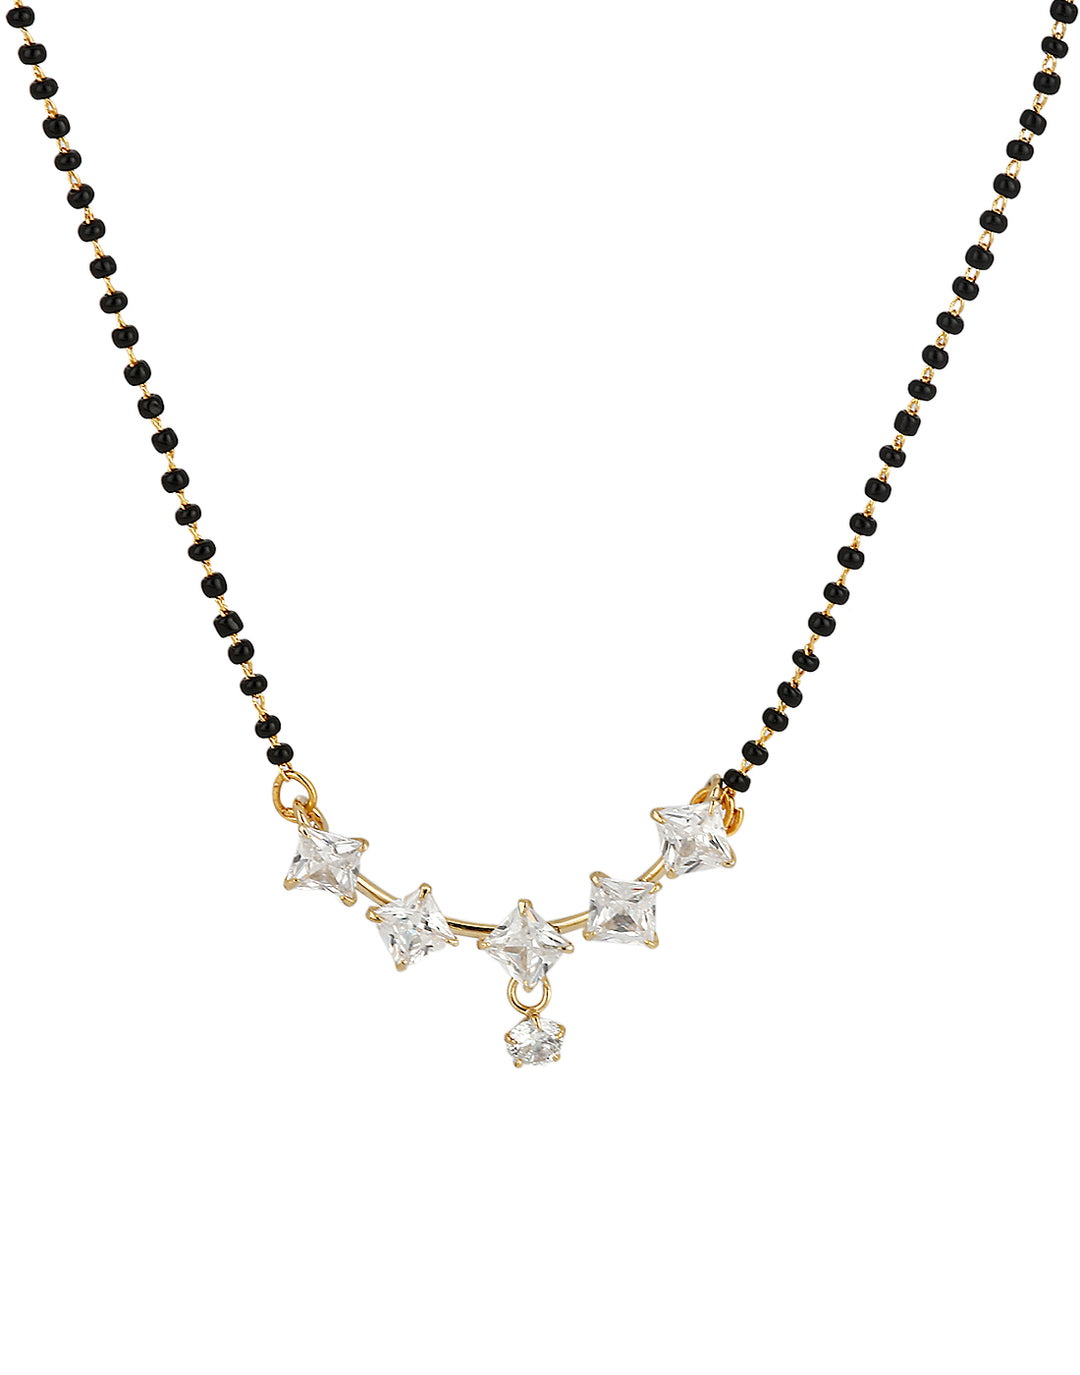 Gold-Plated American Diamond Studded Mangalsutra Set with Earrings